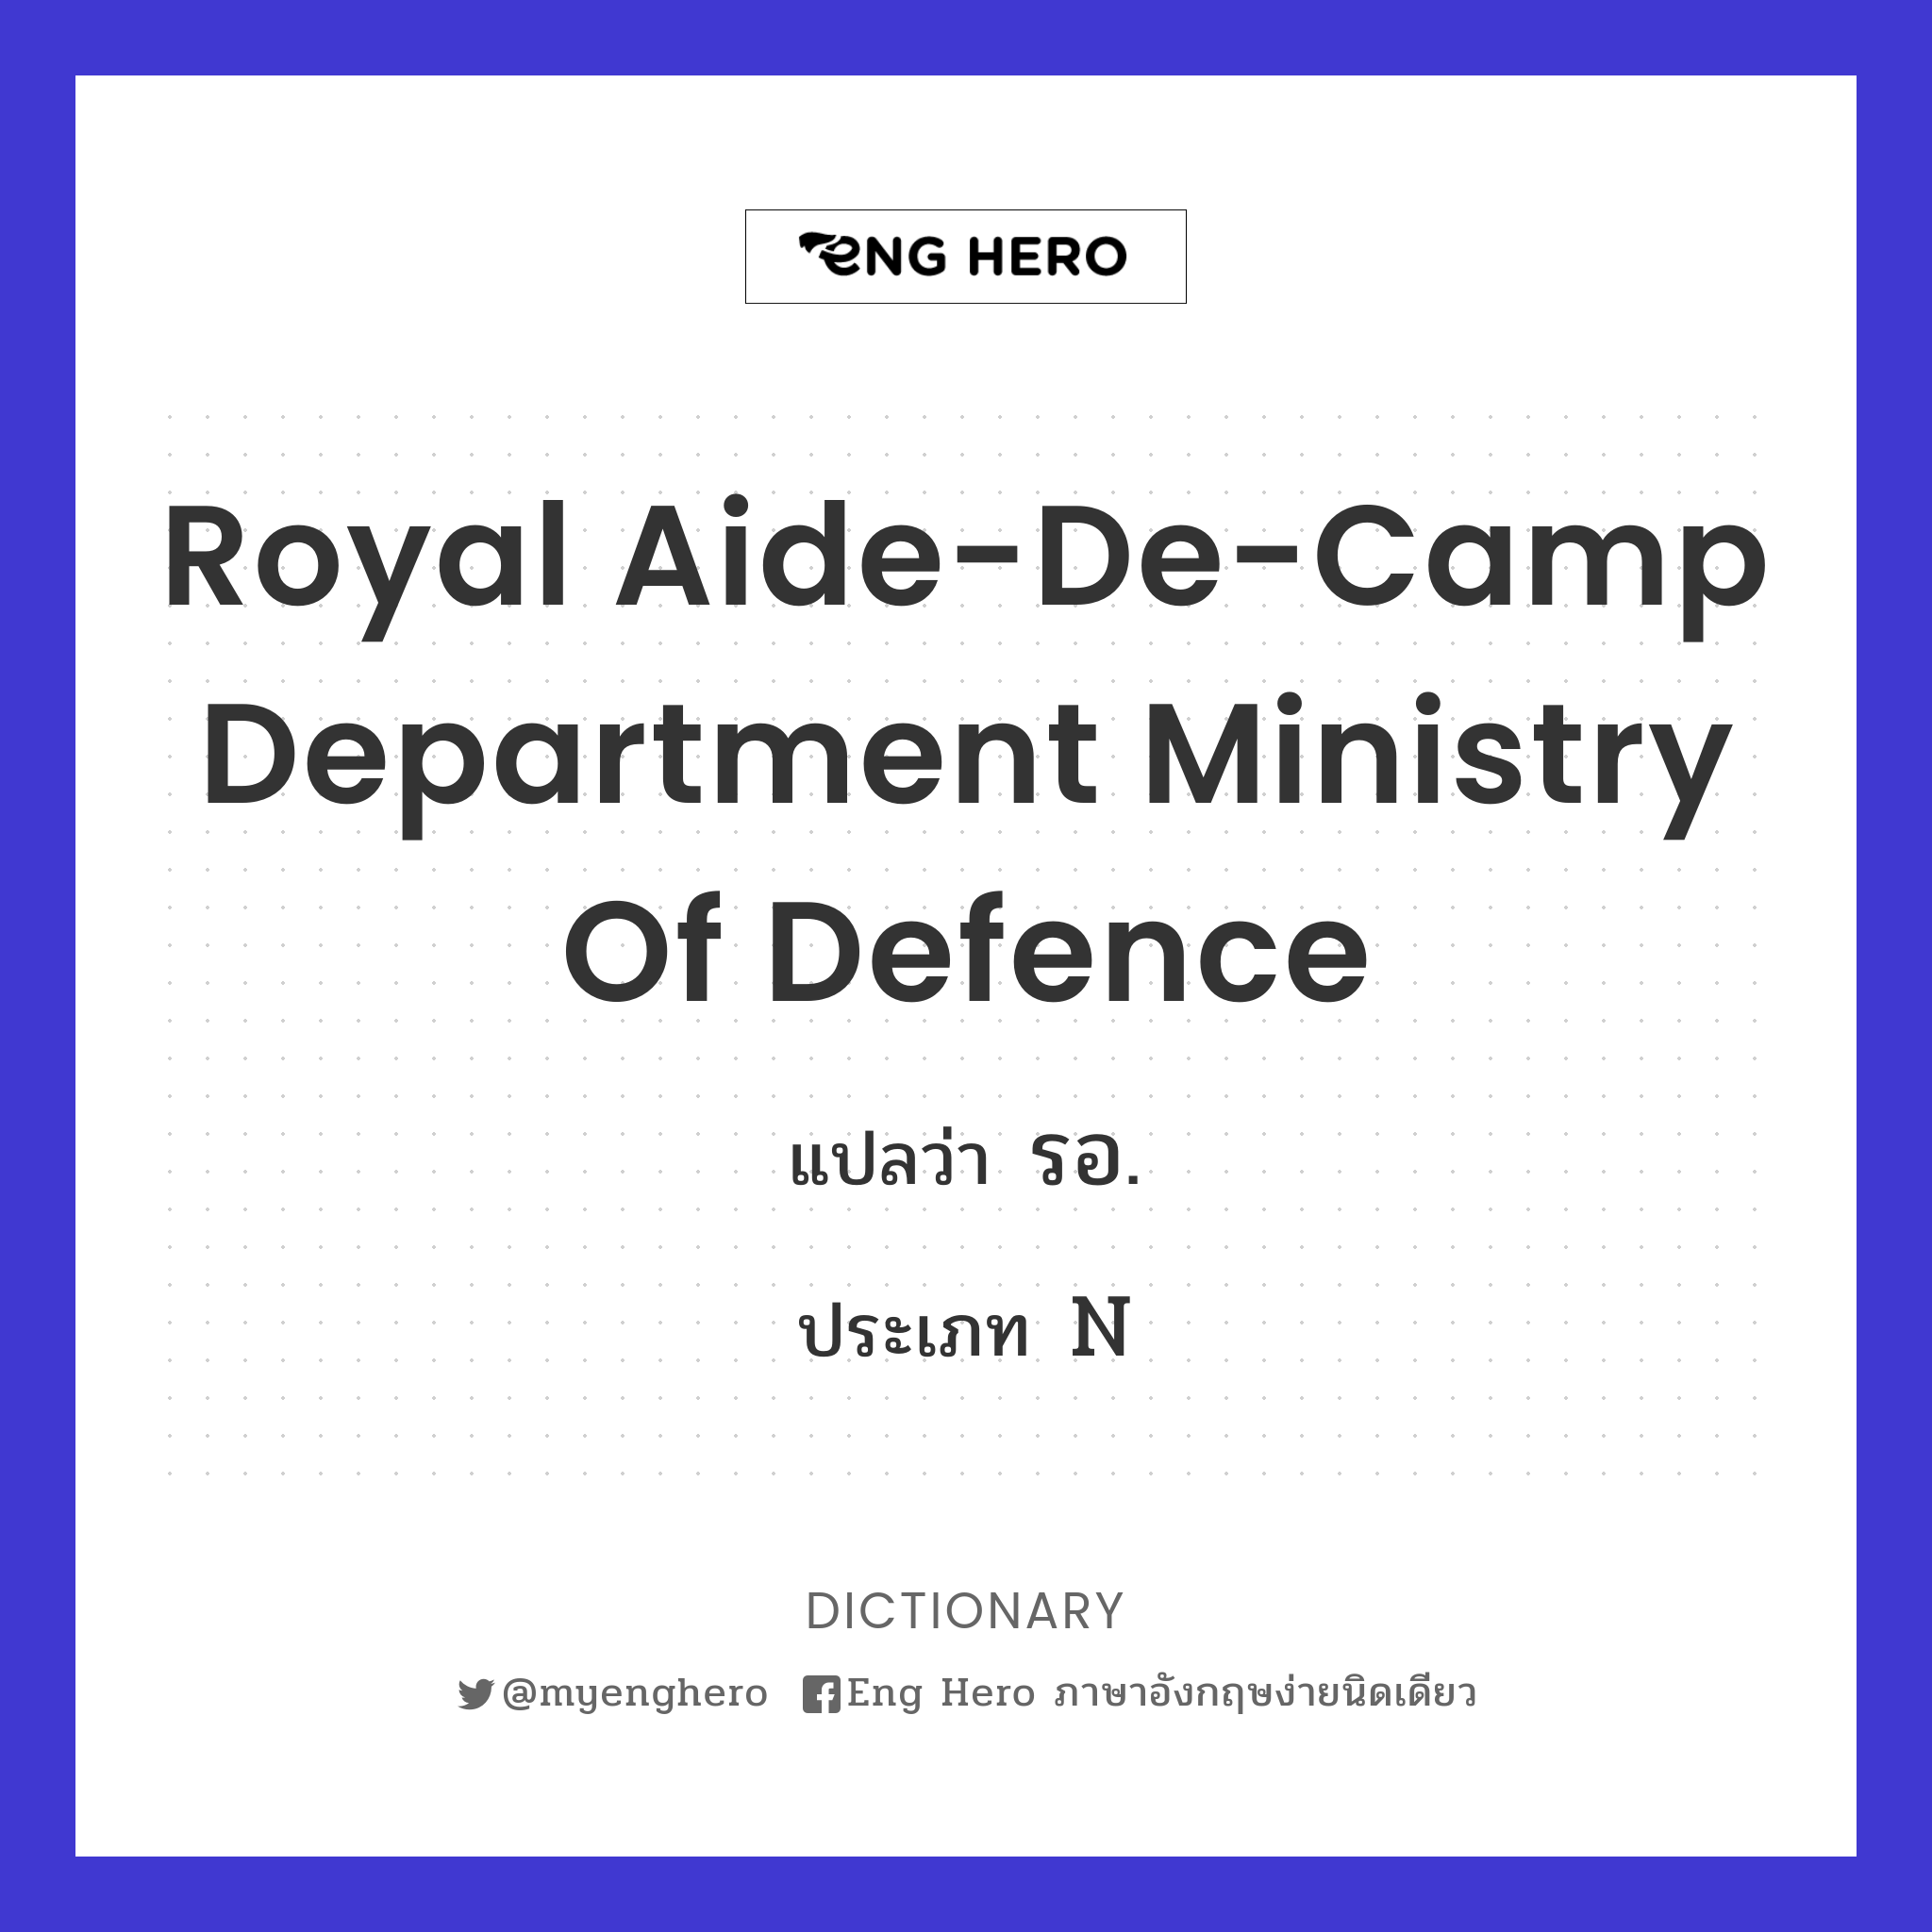 Royal Aide-de-Camp Department Ministry of Defence